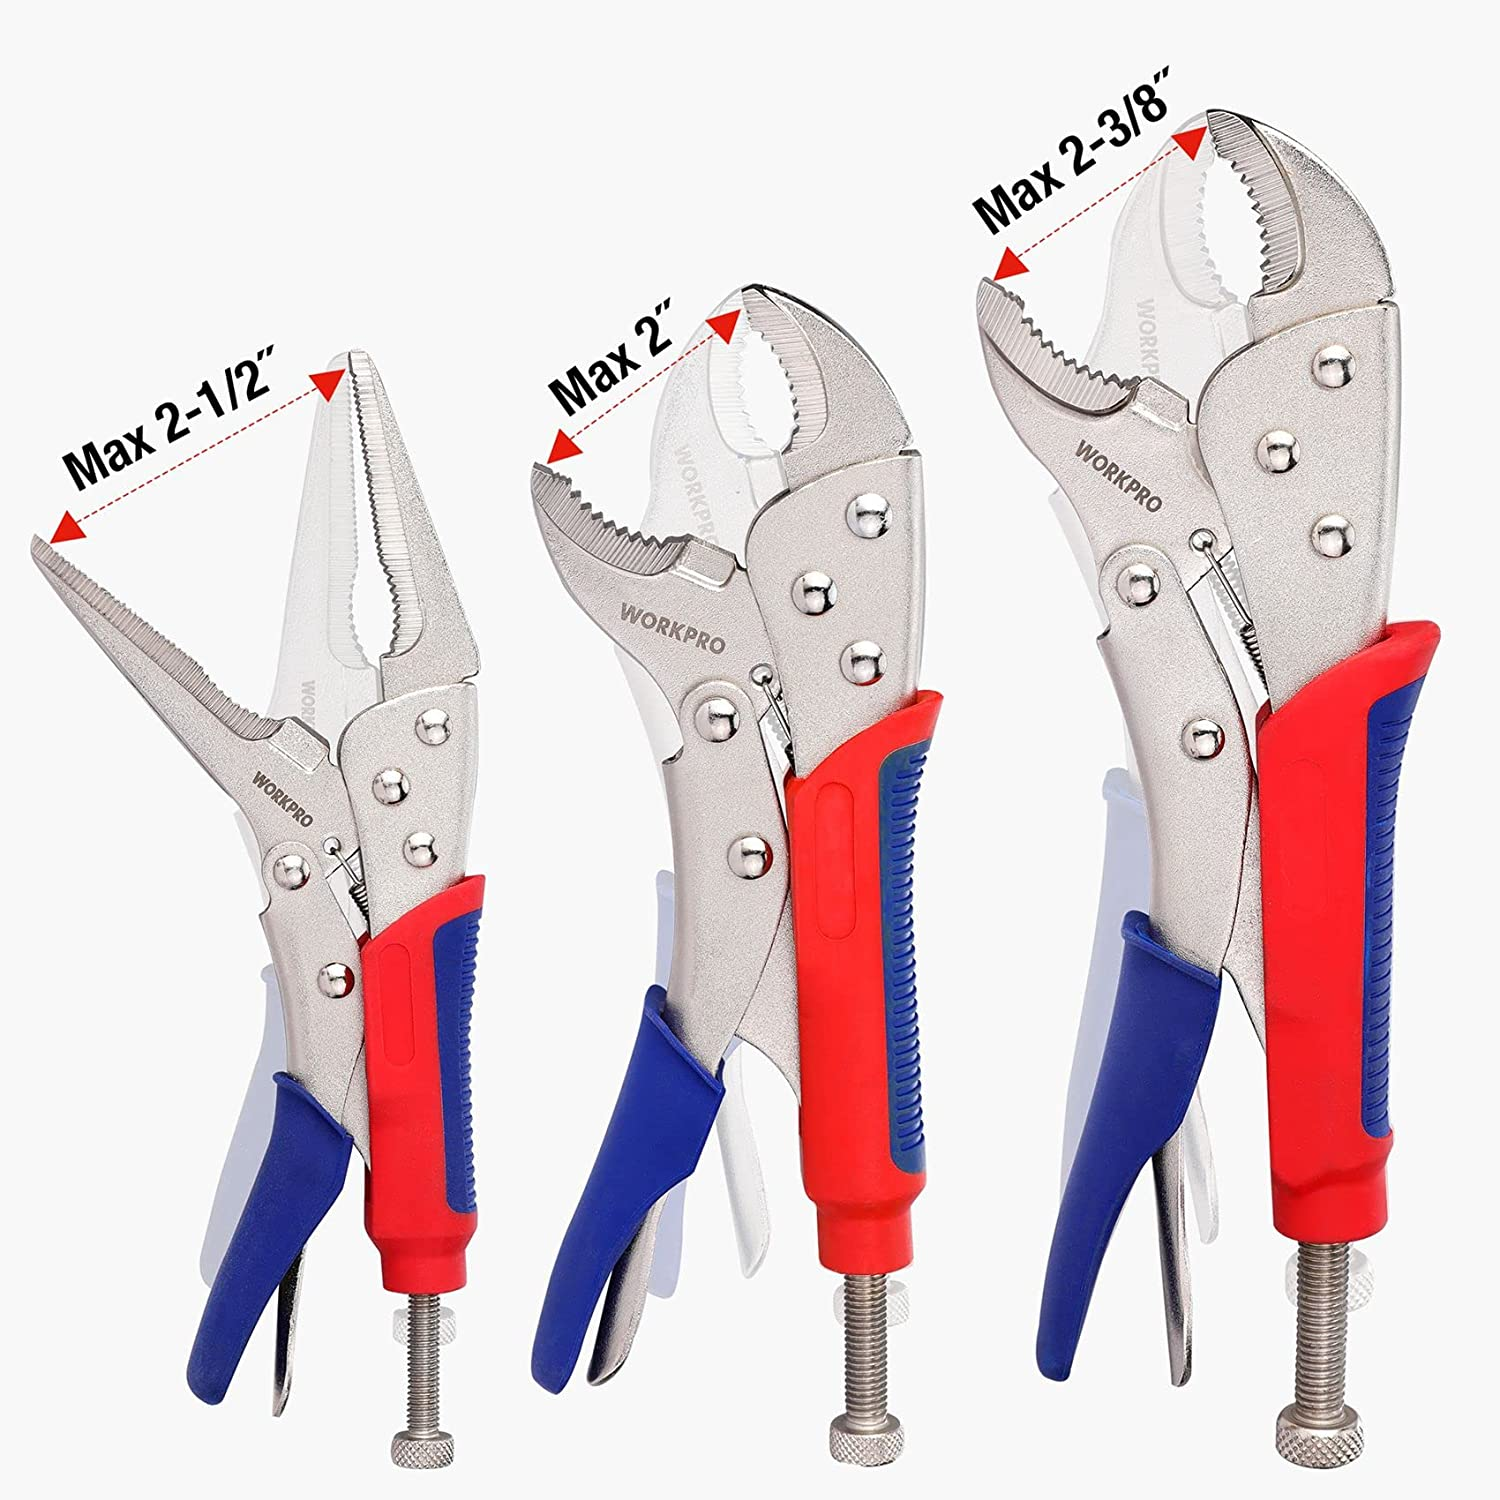 3-Piece Locking Pliers Set, 10-Inch Curved Jaw, 7-Inch Curved Jaw and 6-1/2-Inch Straight Jaw